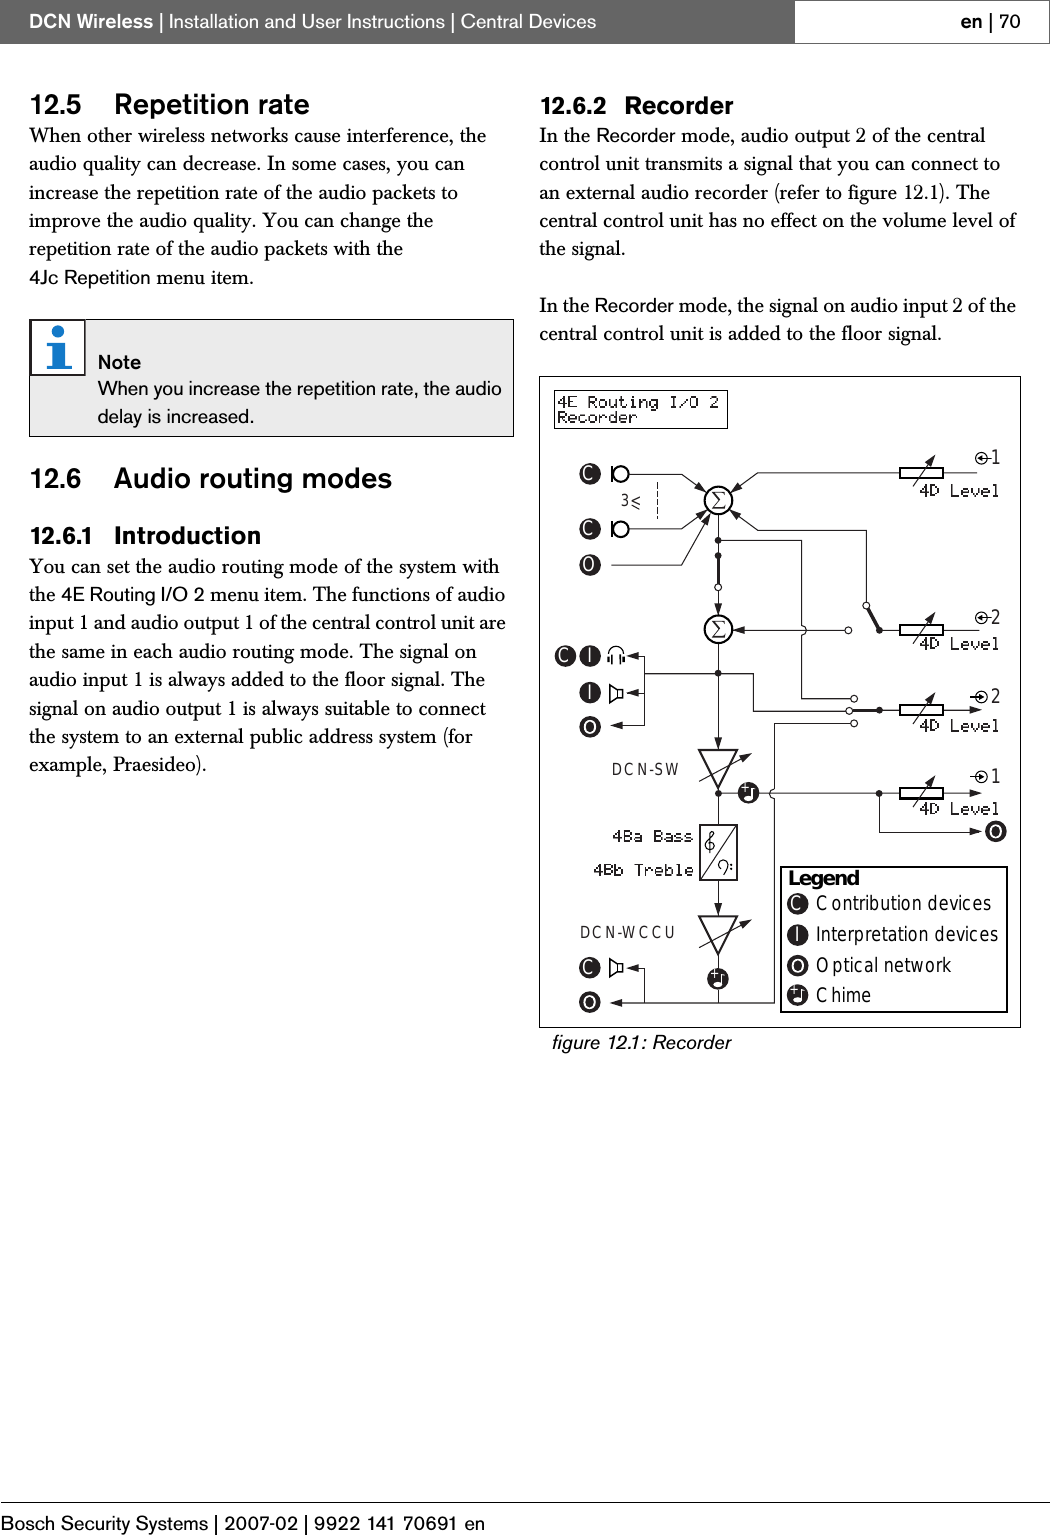 Page 41 of Bosch Security Systems DCNWAP Wireless Access Point User Manual Part 2